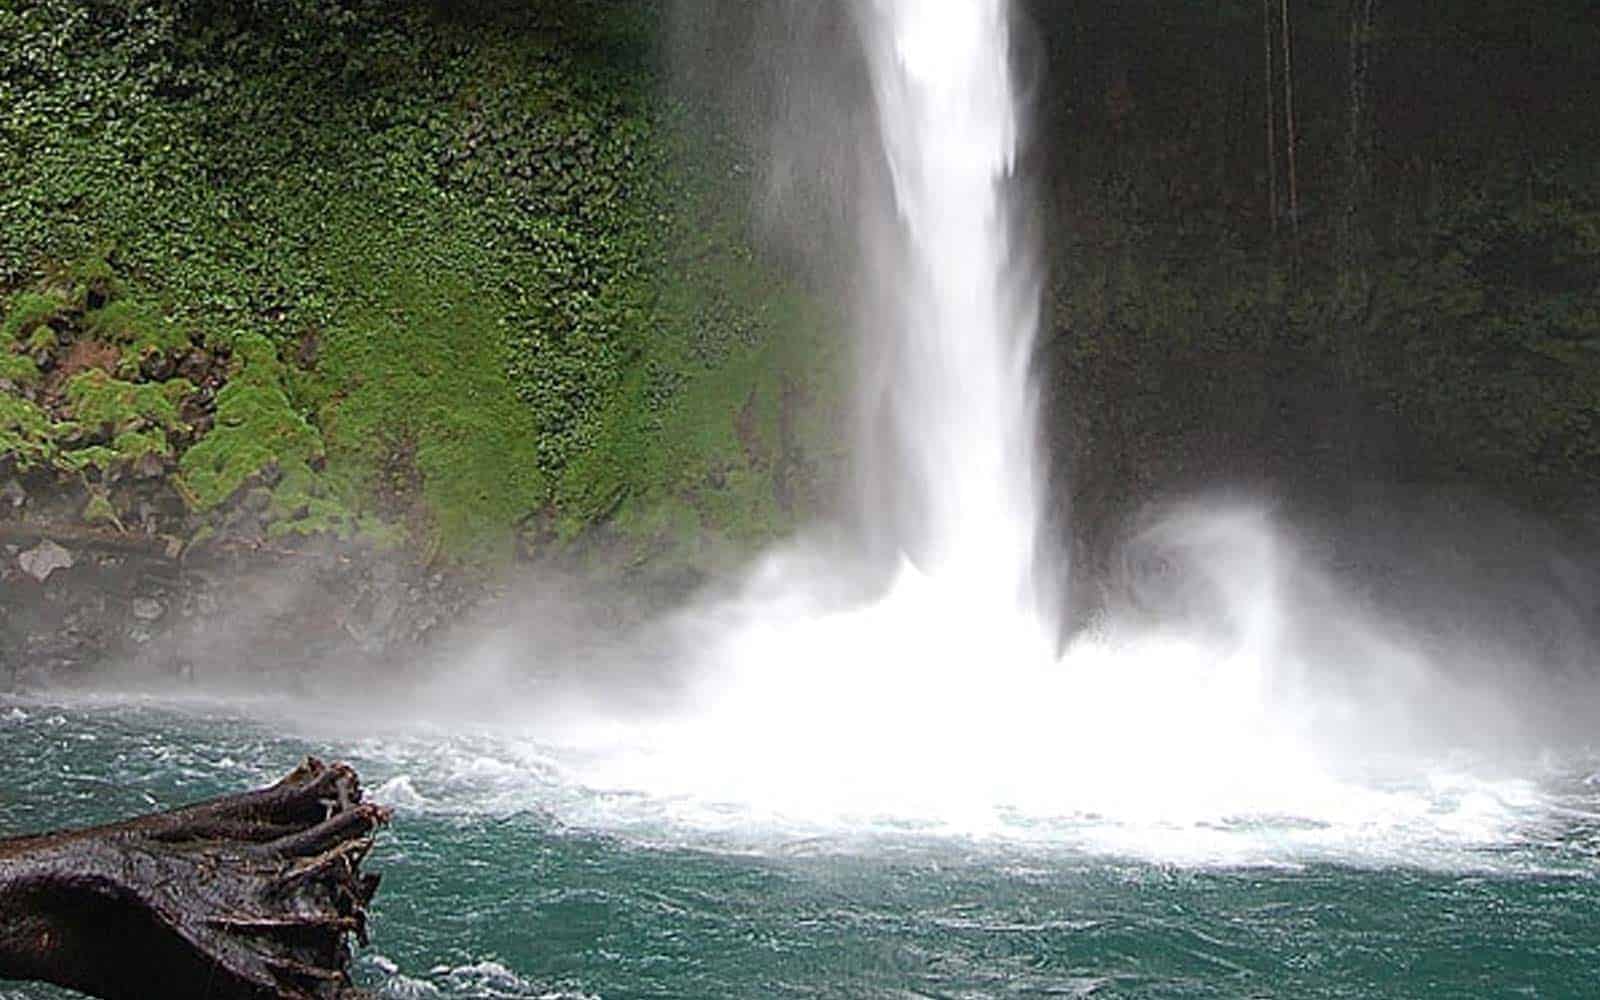 Costa Rica Blue River and Volcanoes Tour